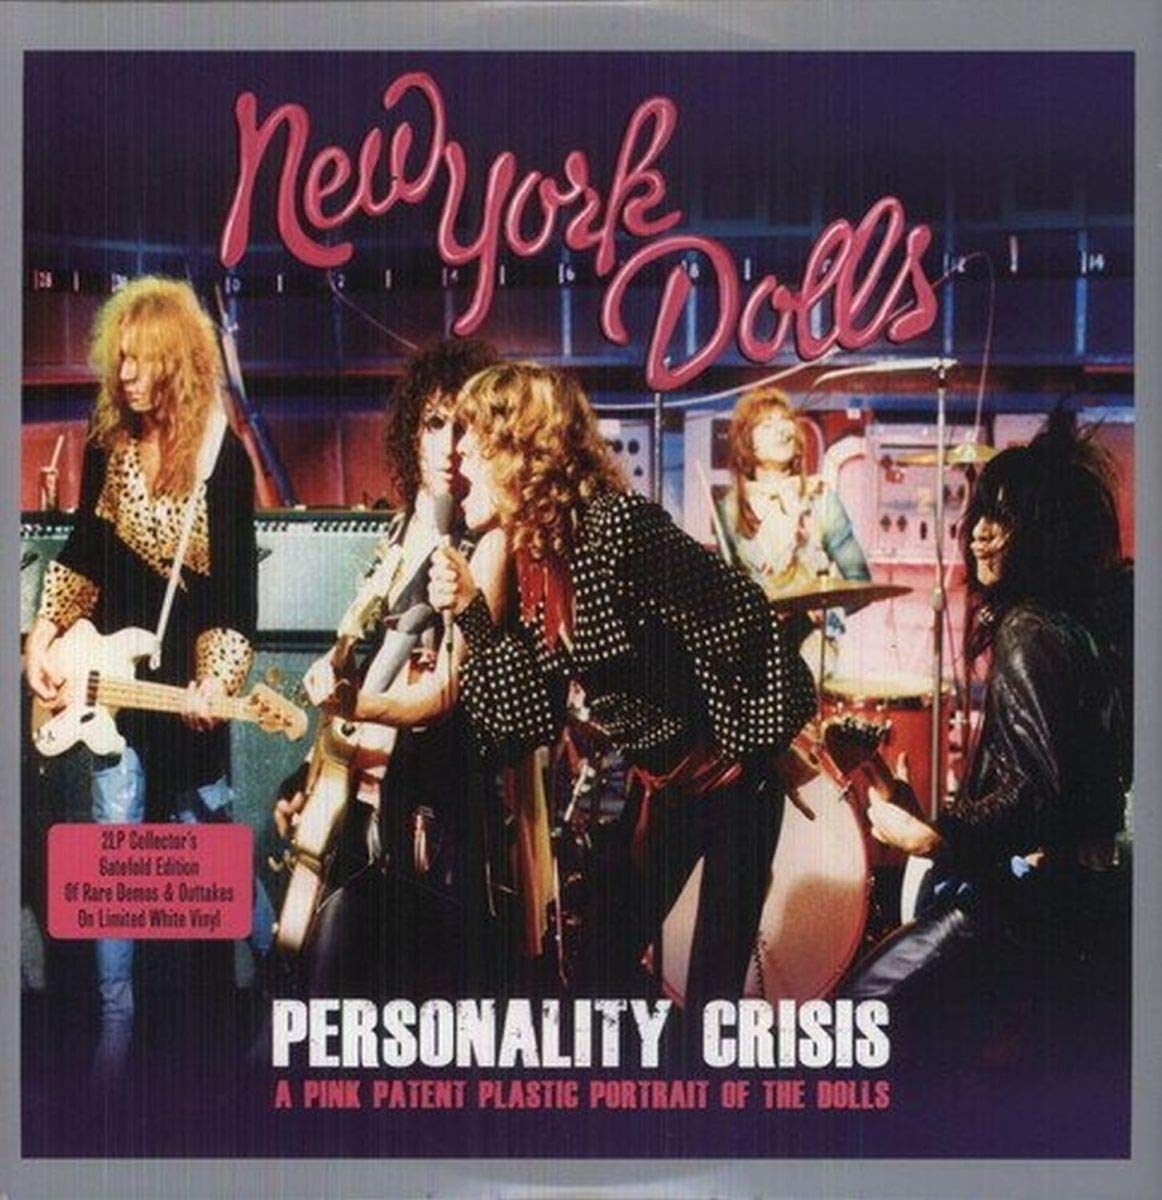 New York Dolls - Personality Crisis mp3 download